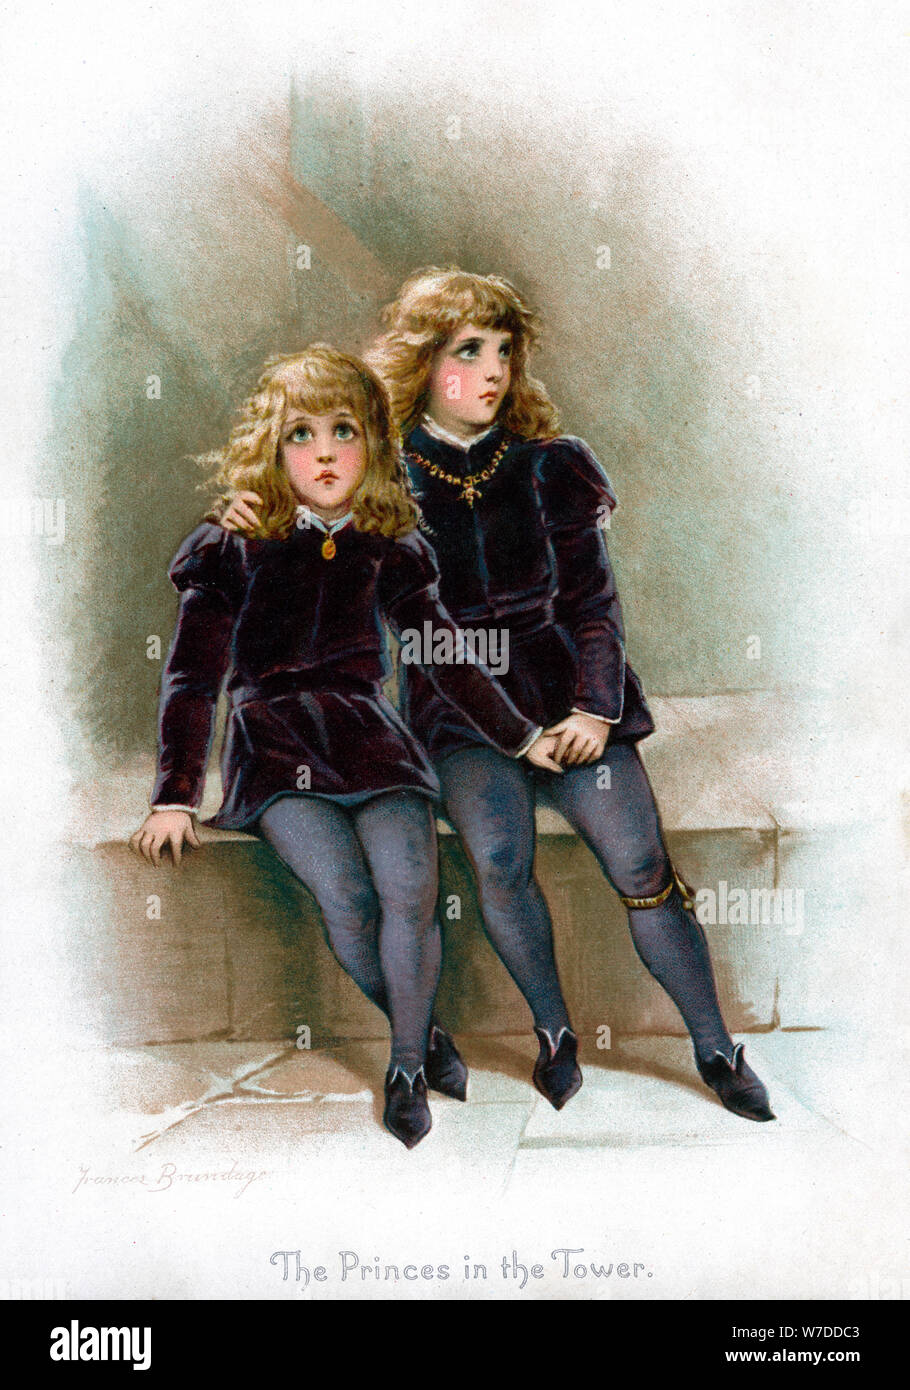 'The Princes in the Tower', 1897.Artist: Frances Brundage Stock Photo